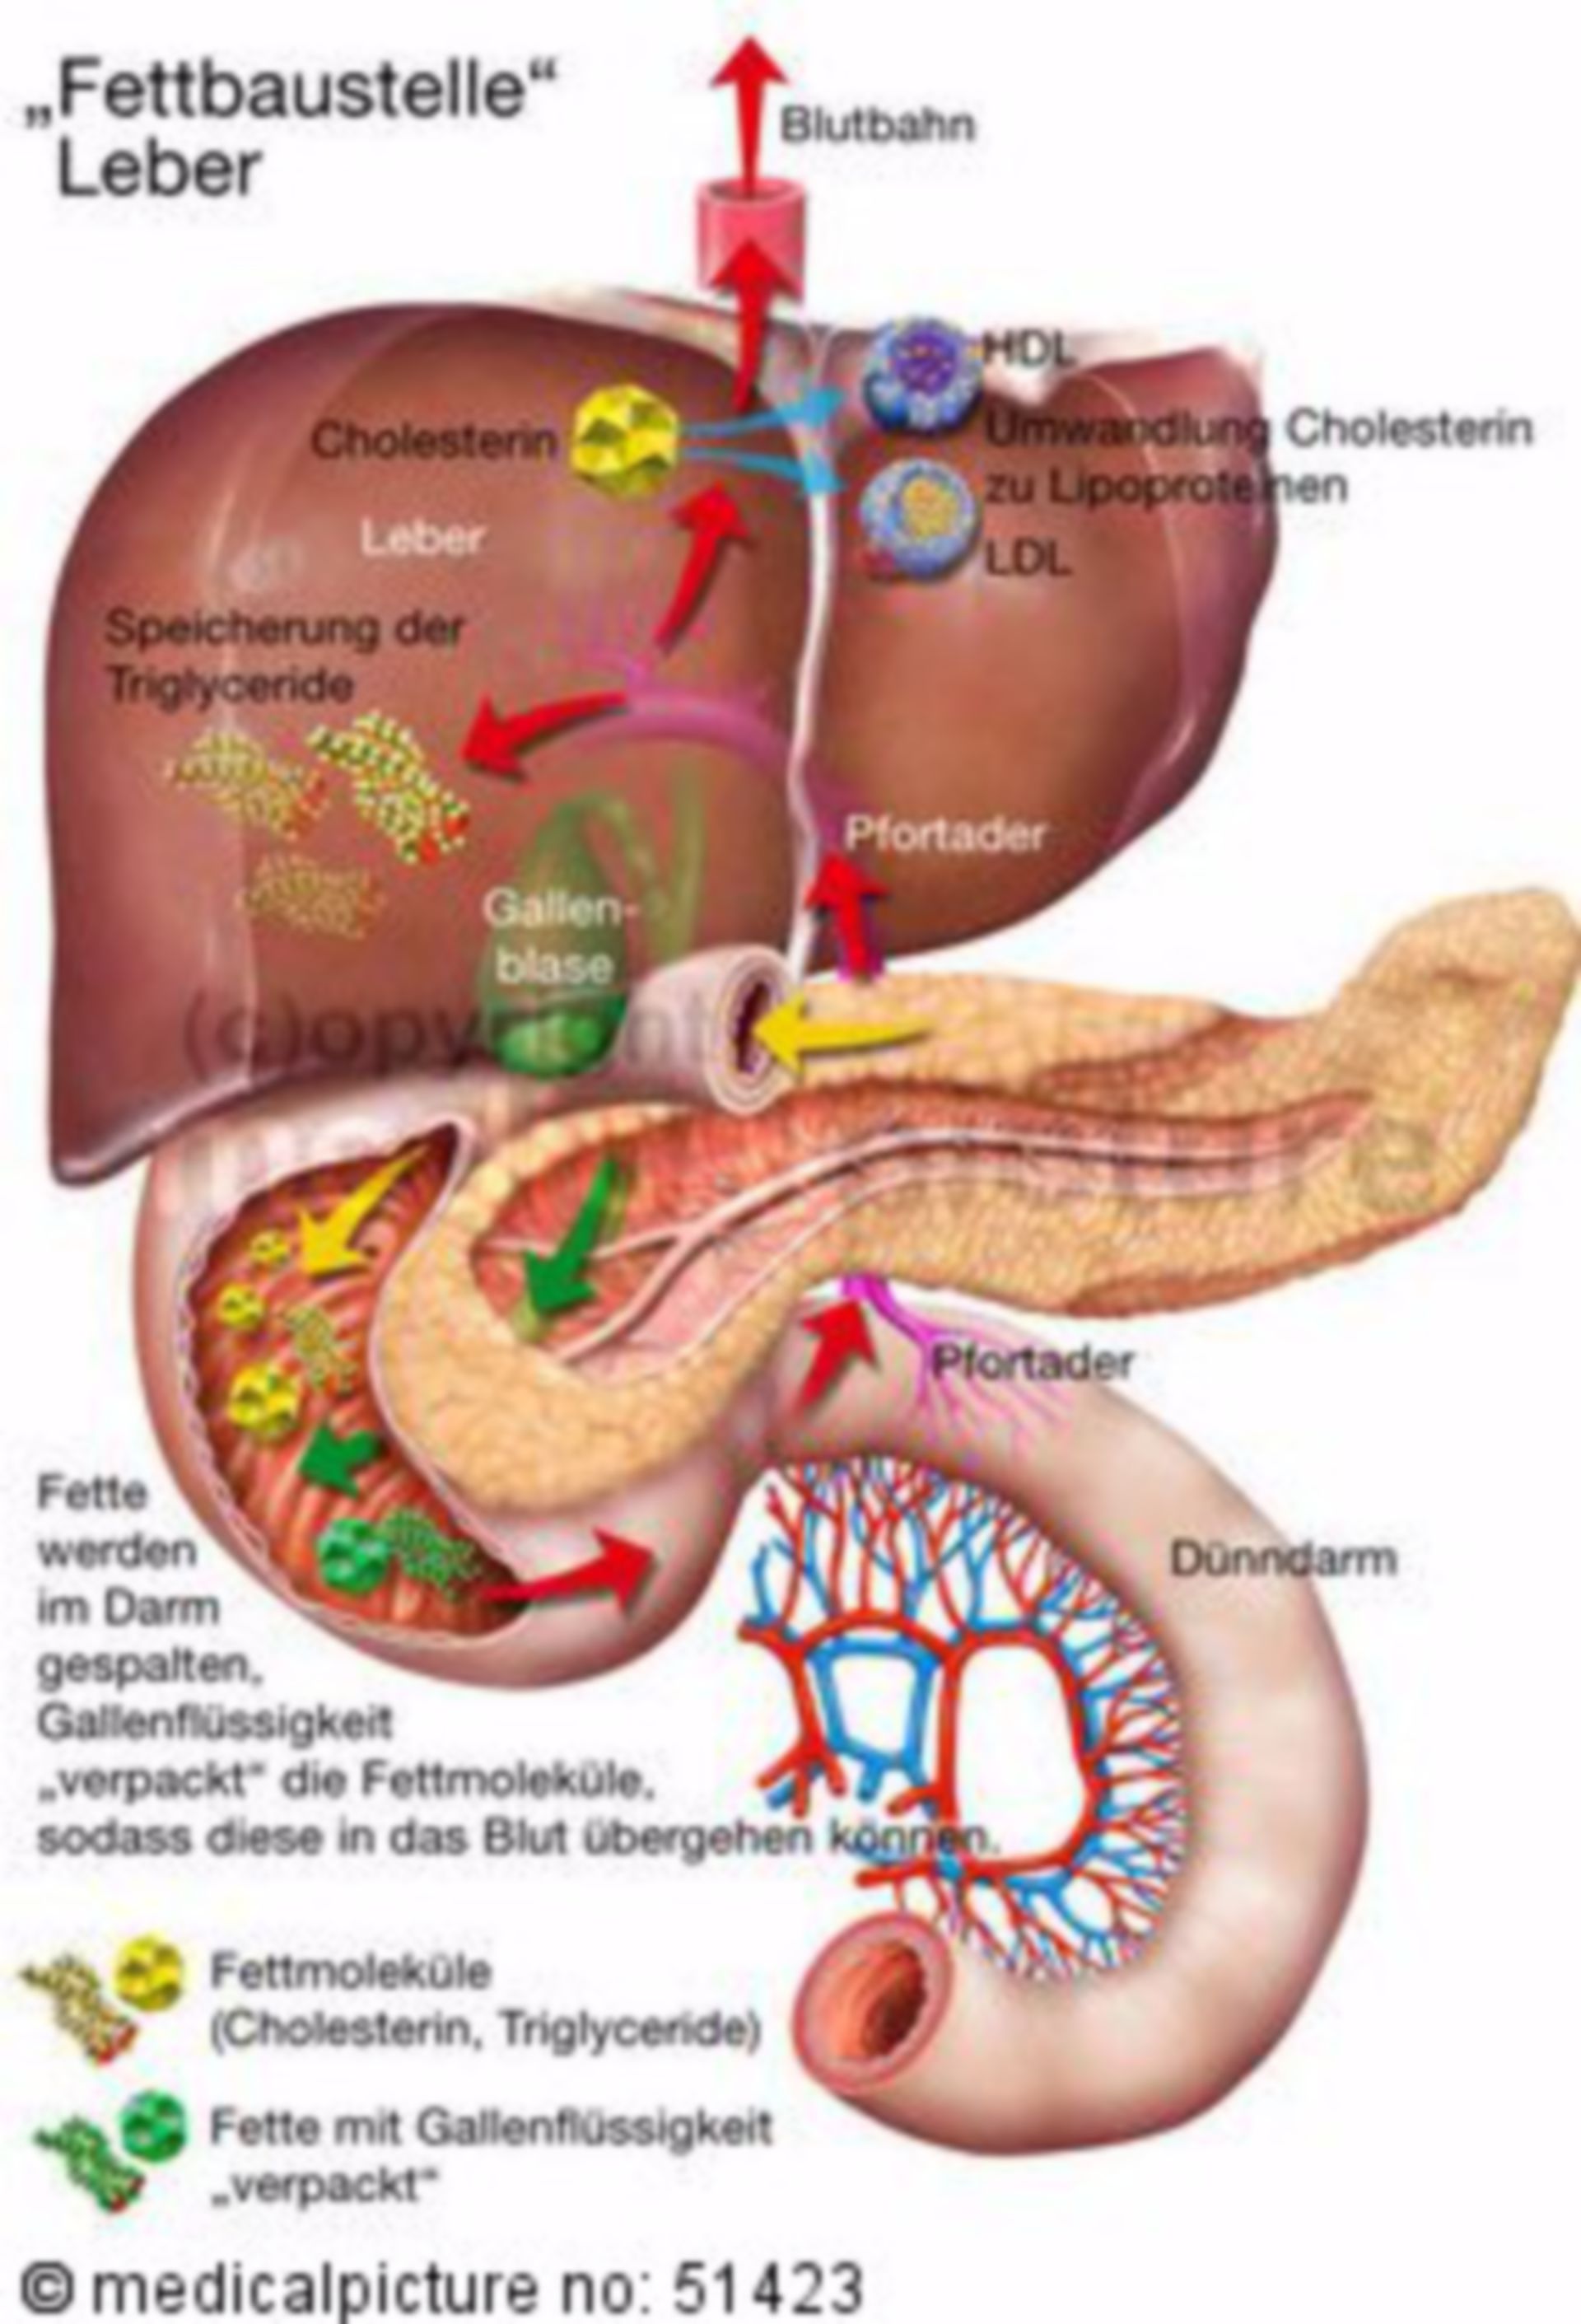 Fat metabolism in the liver